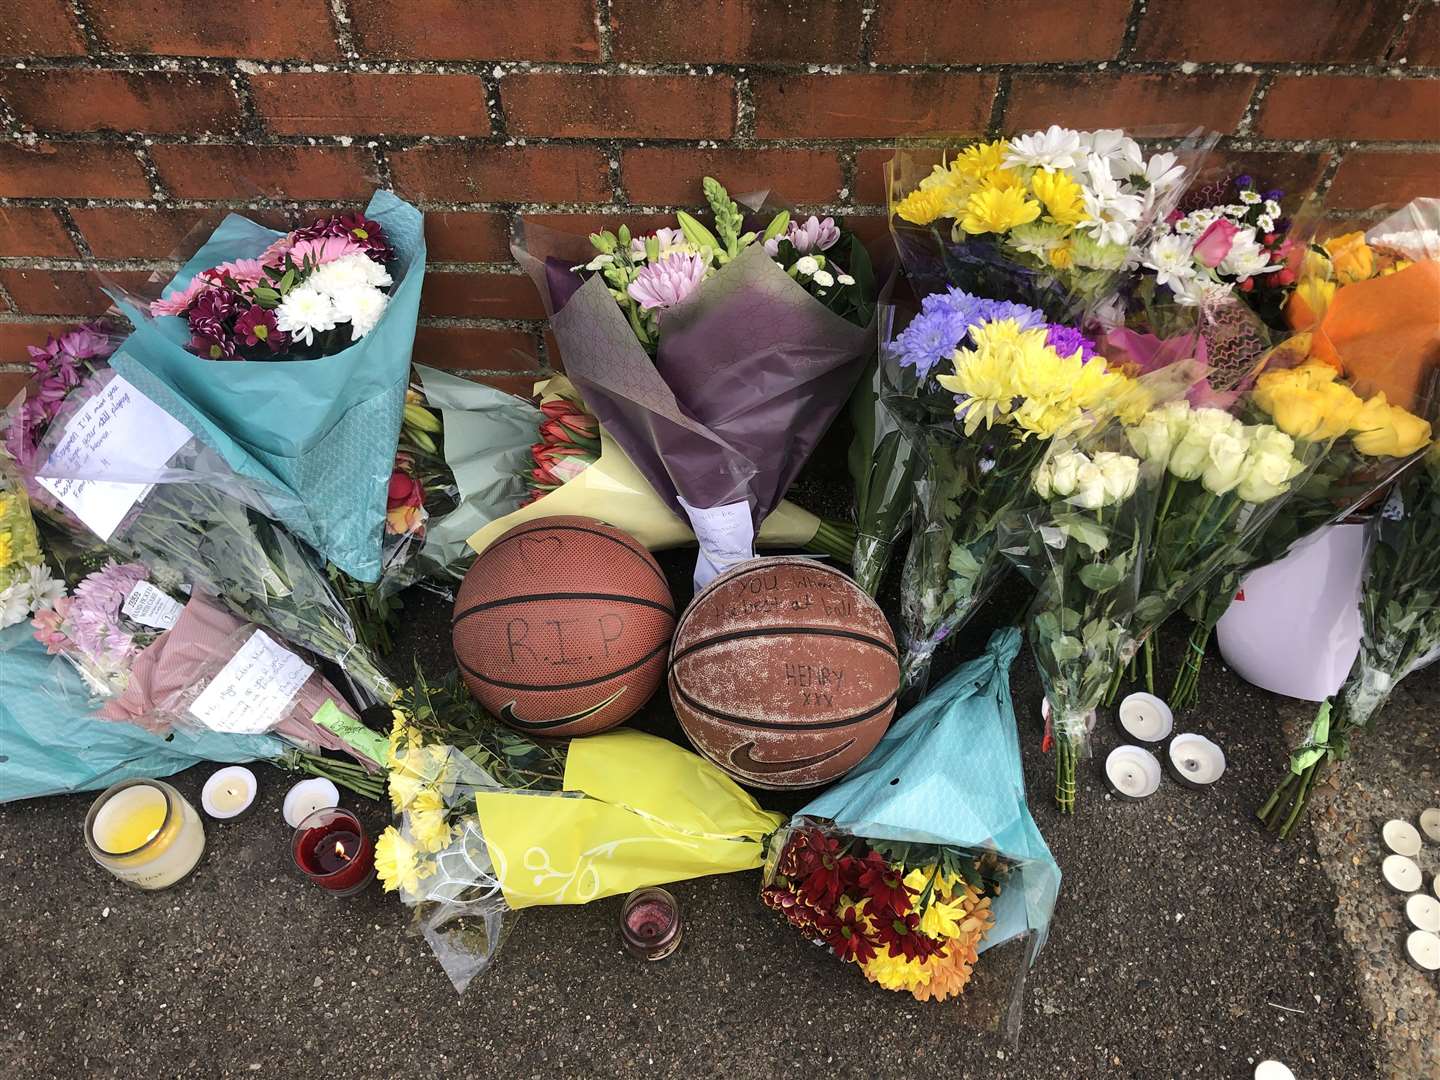 Floral, candle and basketball tributes were left at the scene. Picture from February